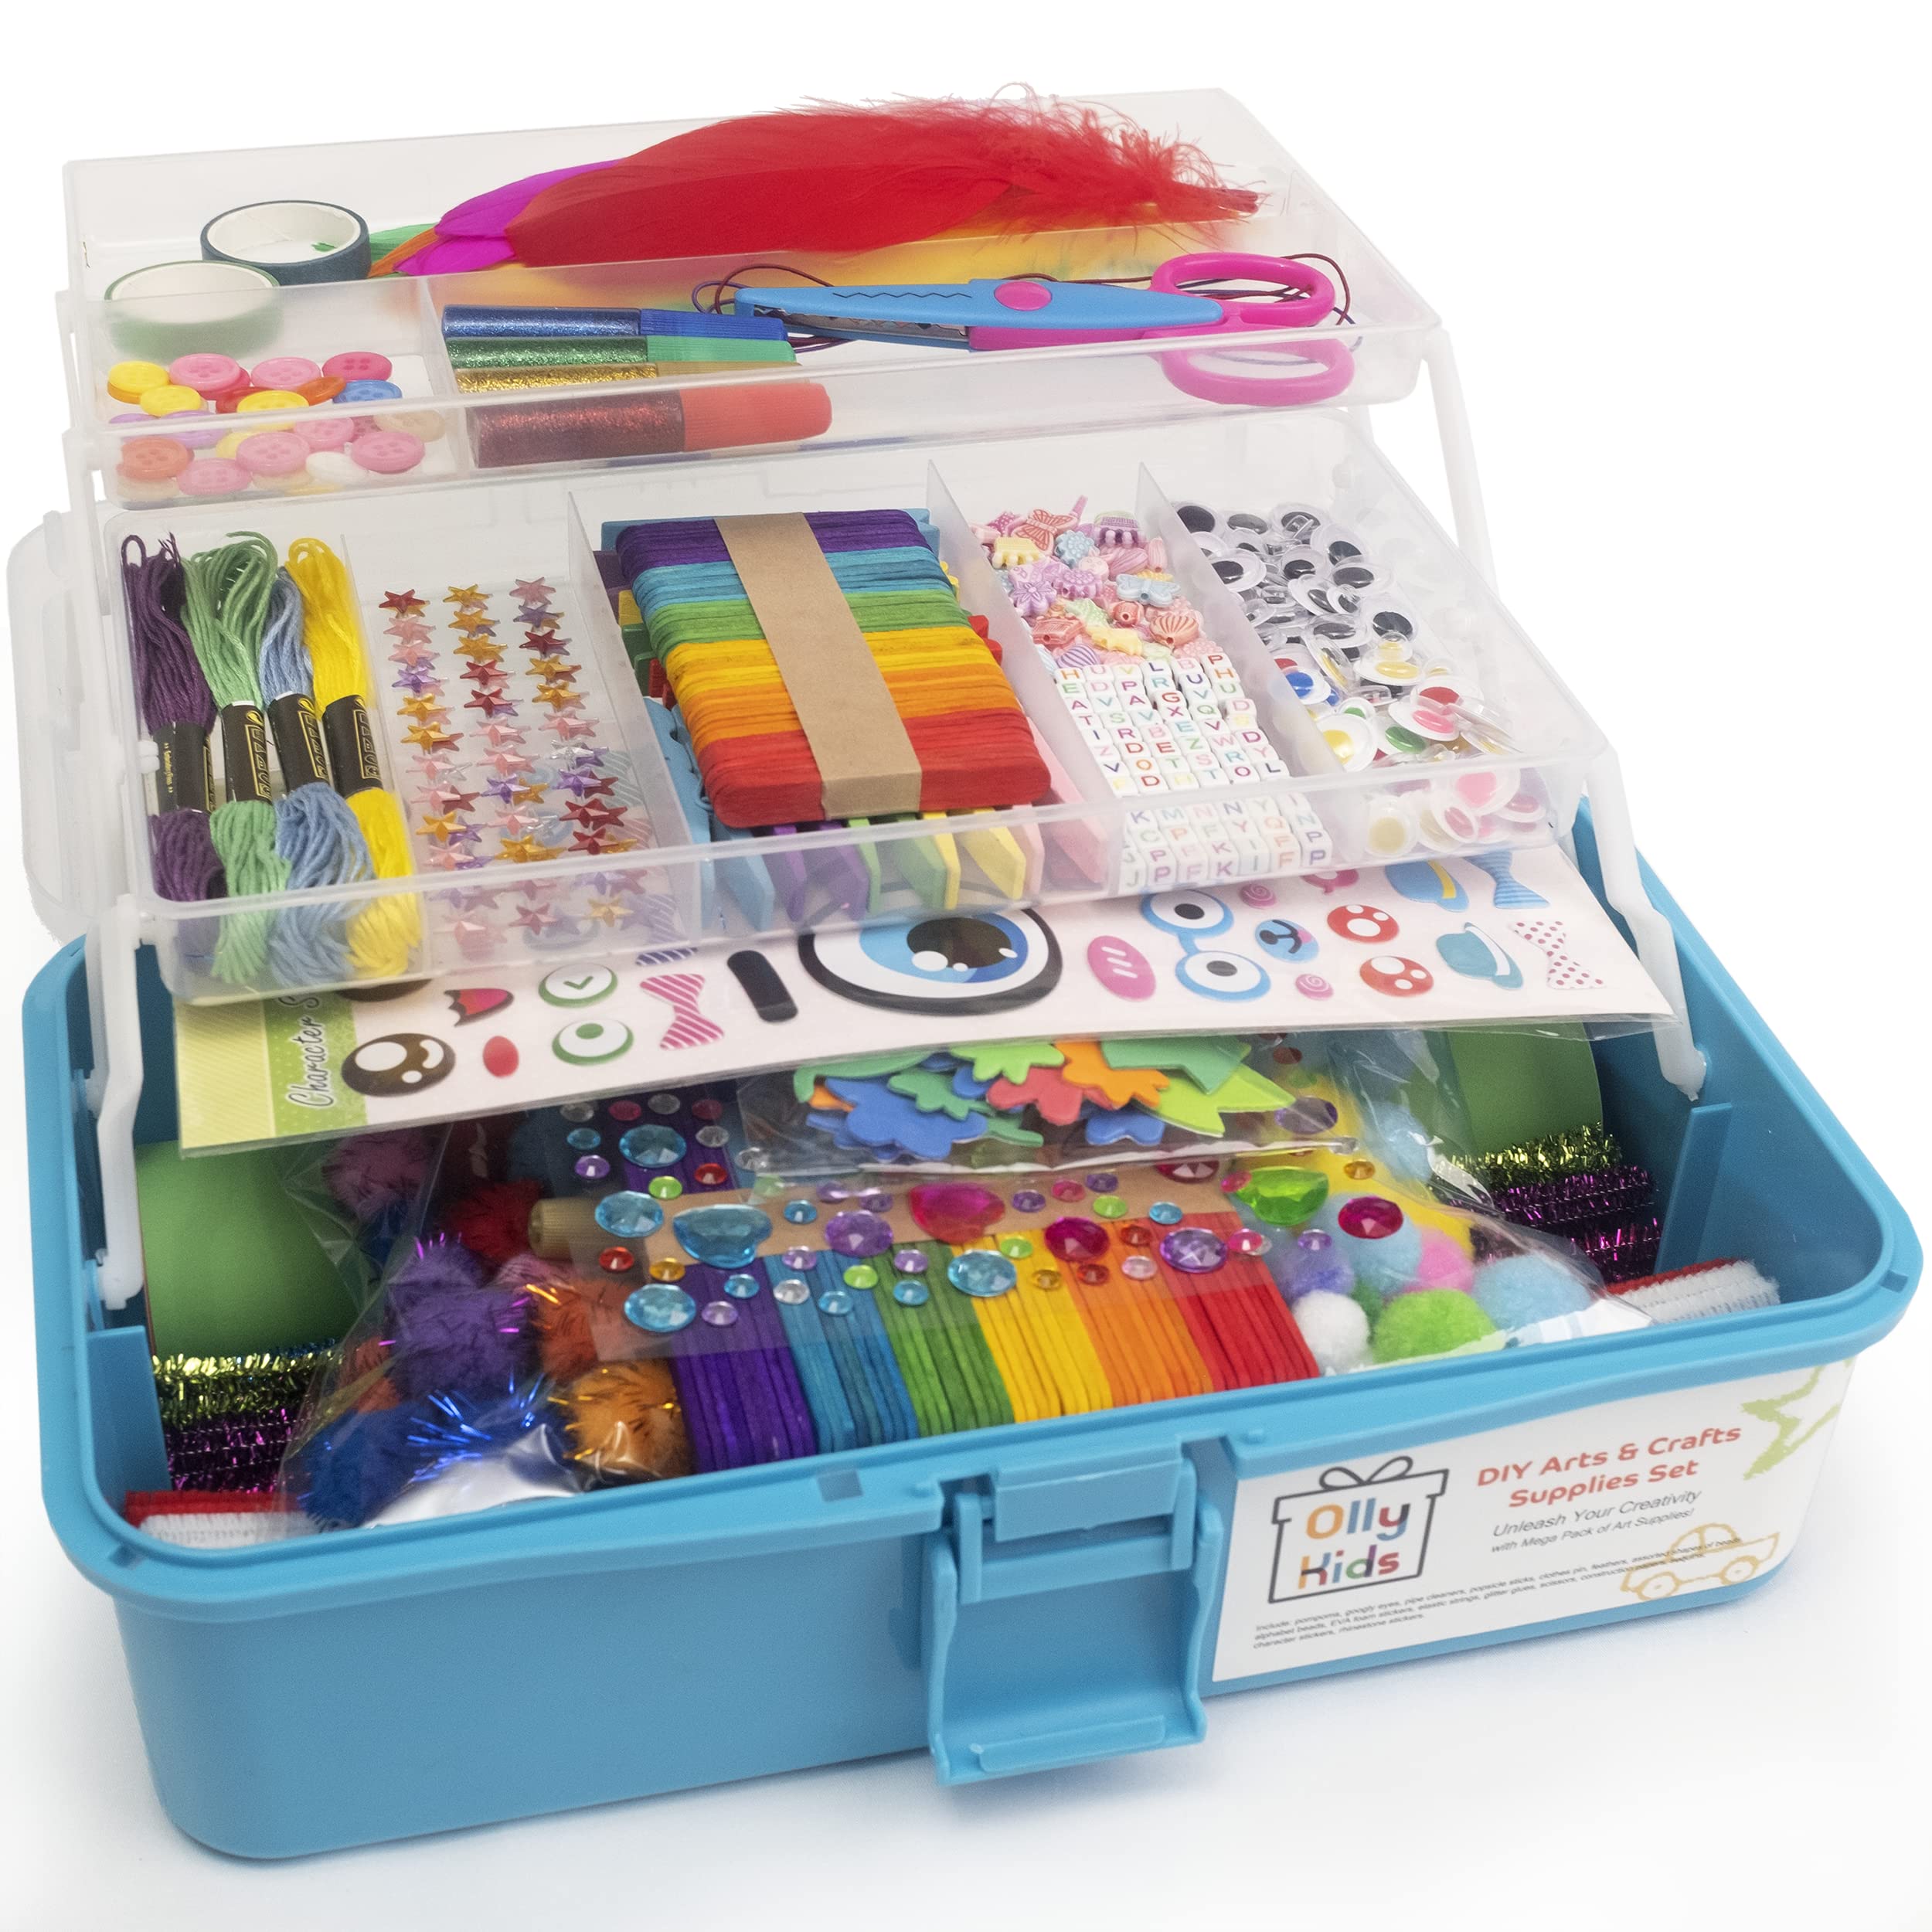 Olly Kids Craft Kits Library in a Plastic Craft Box Organizer- Craft and  Art Supplies for Kids Ages 4 5 6 7 8 9 10 11 &12 Year O